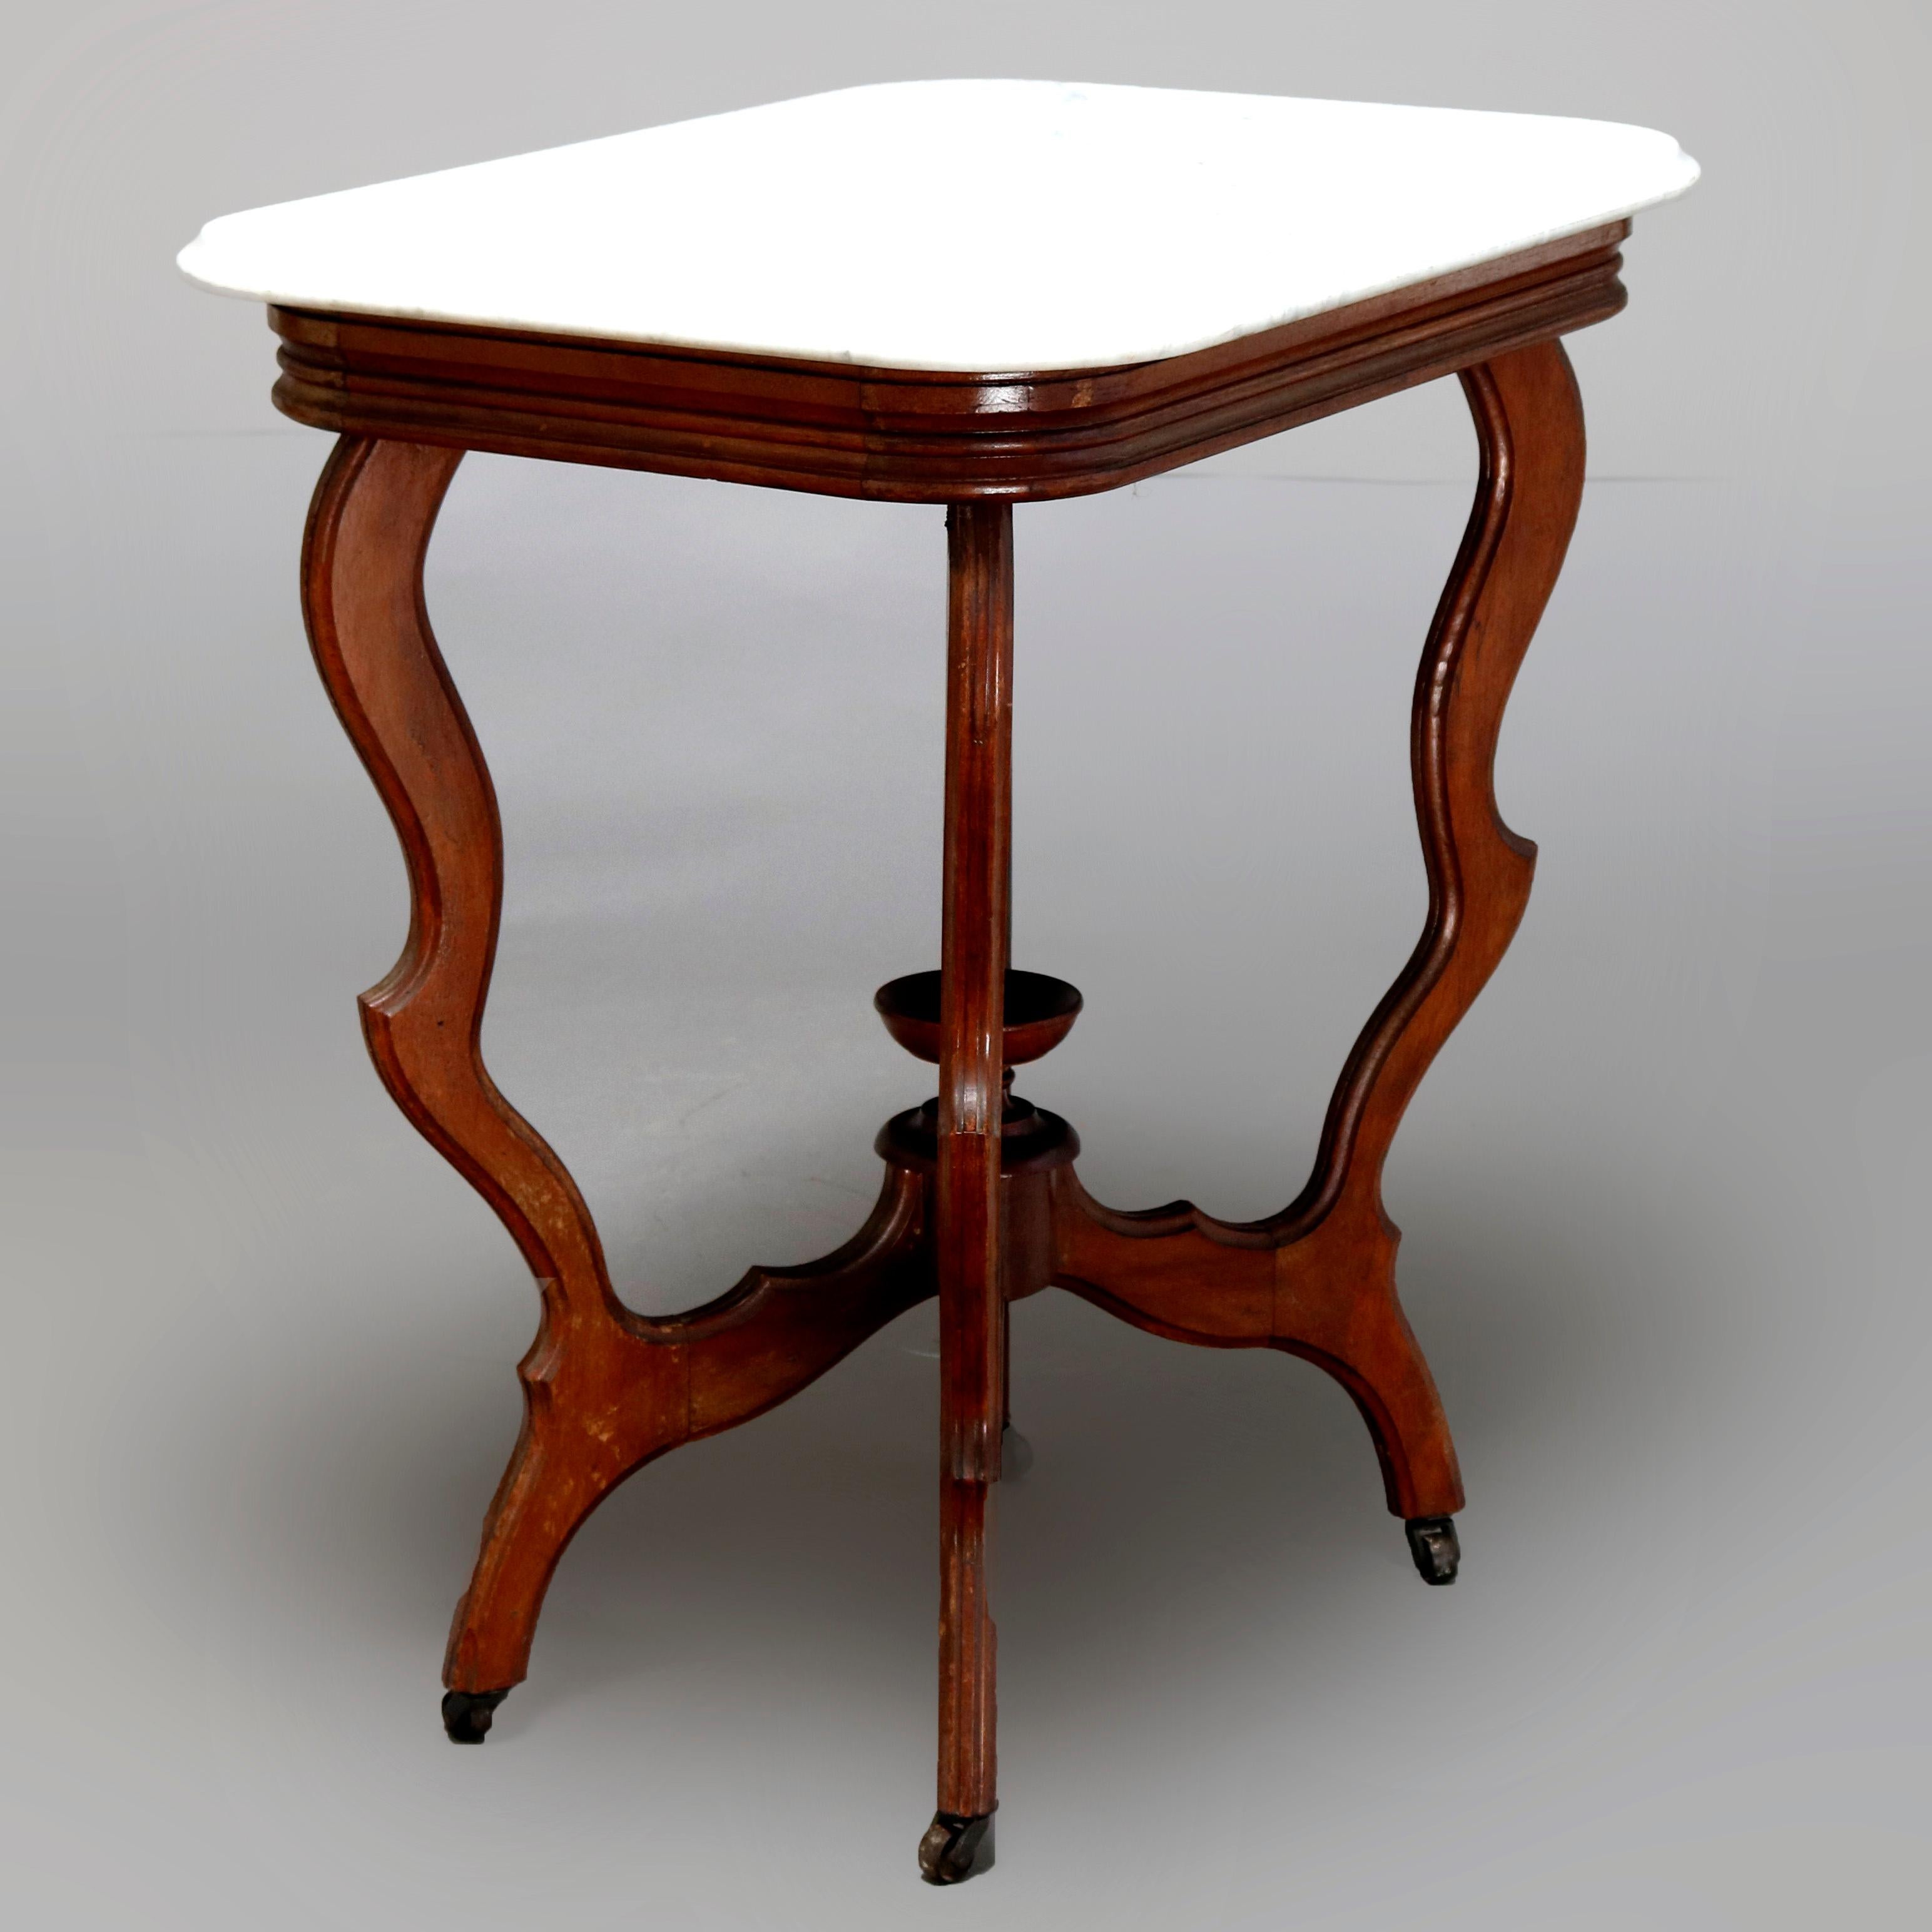 American Antique Victorian Carved Walnut and Beveled Marble Side Table, circa 1880 For Sale